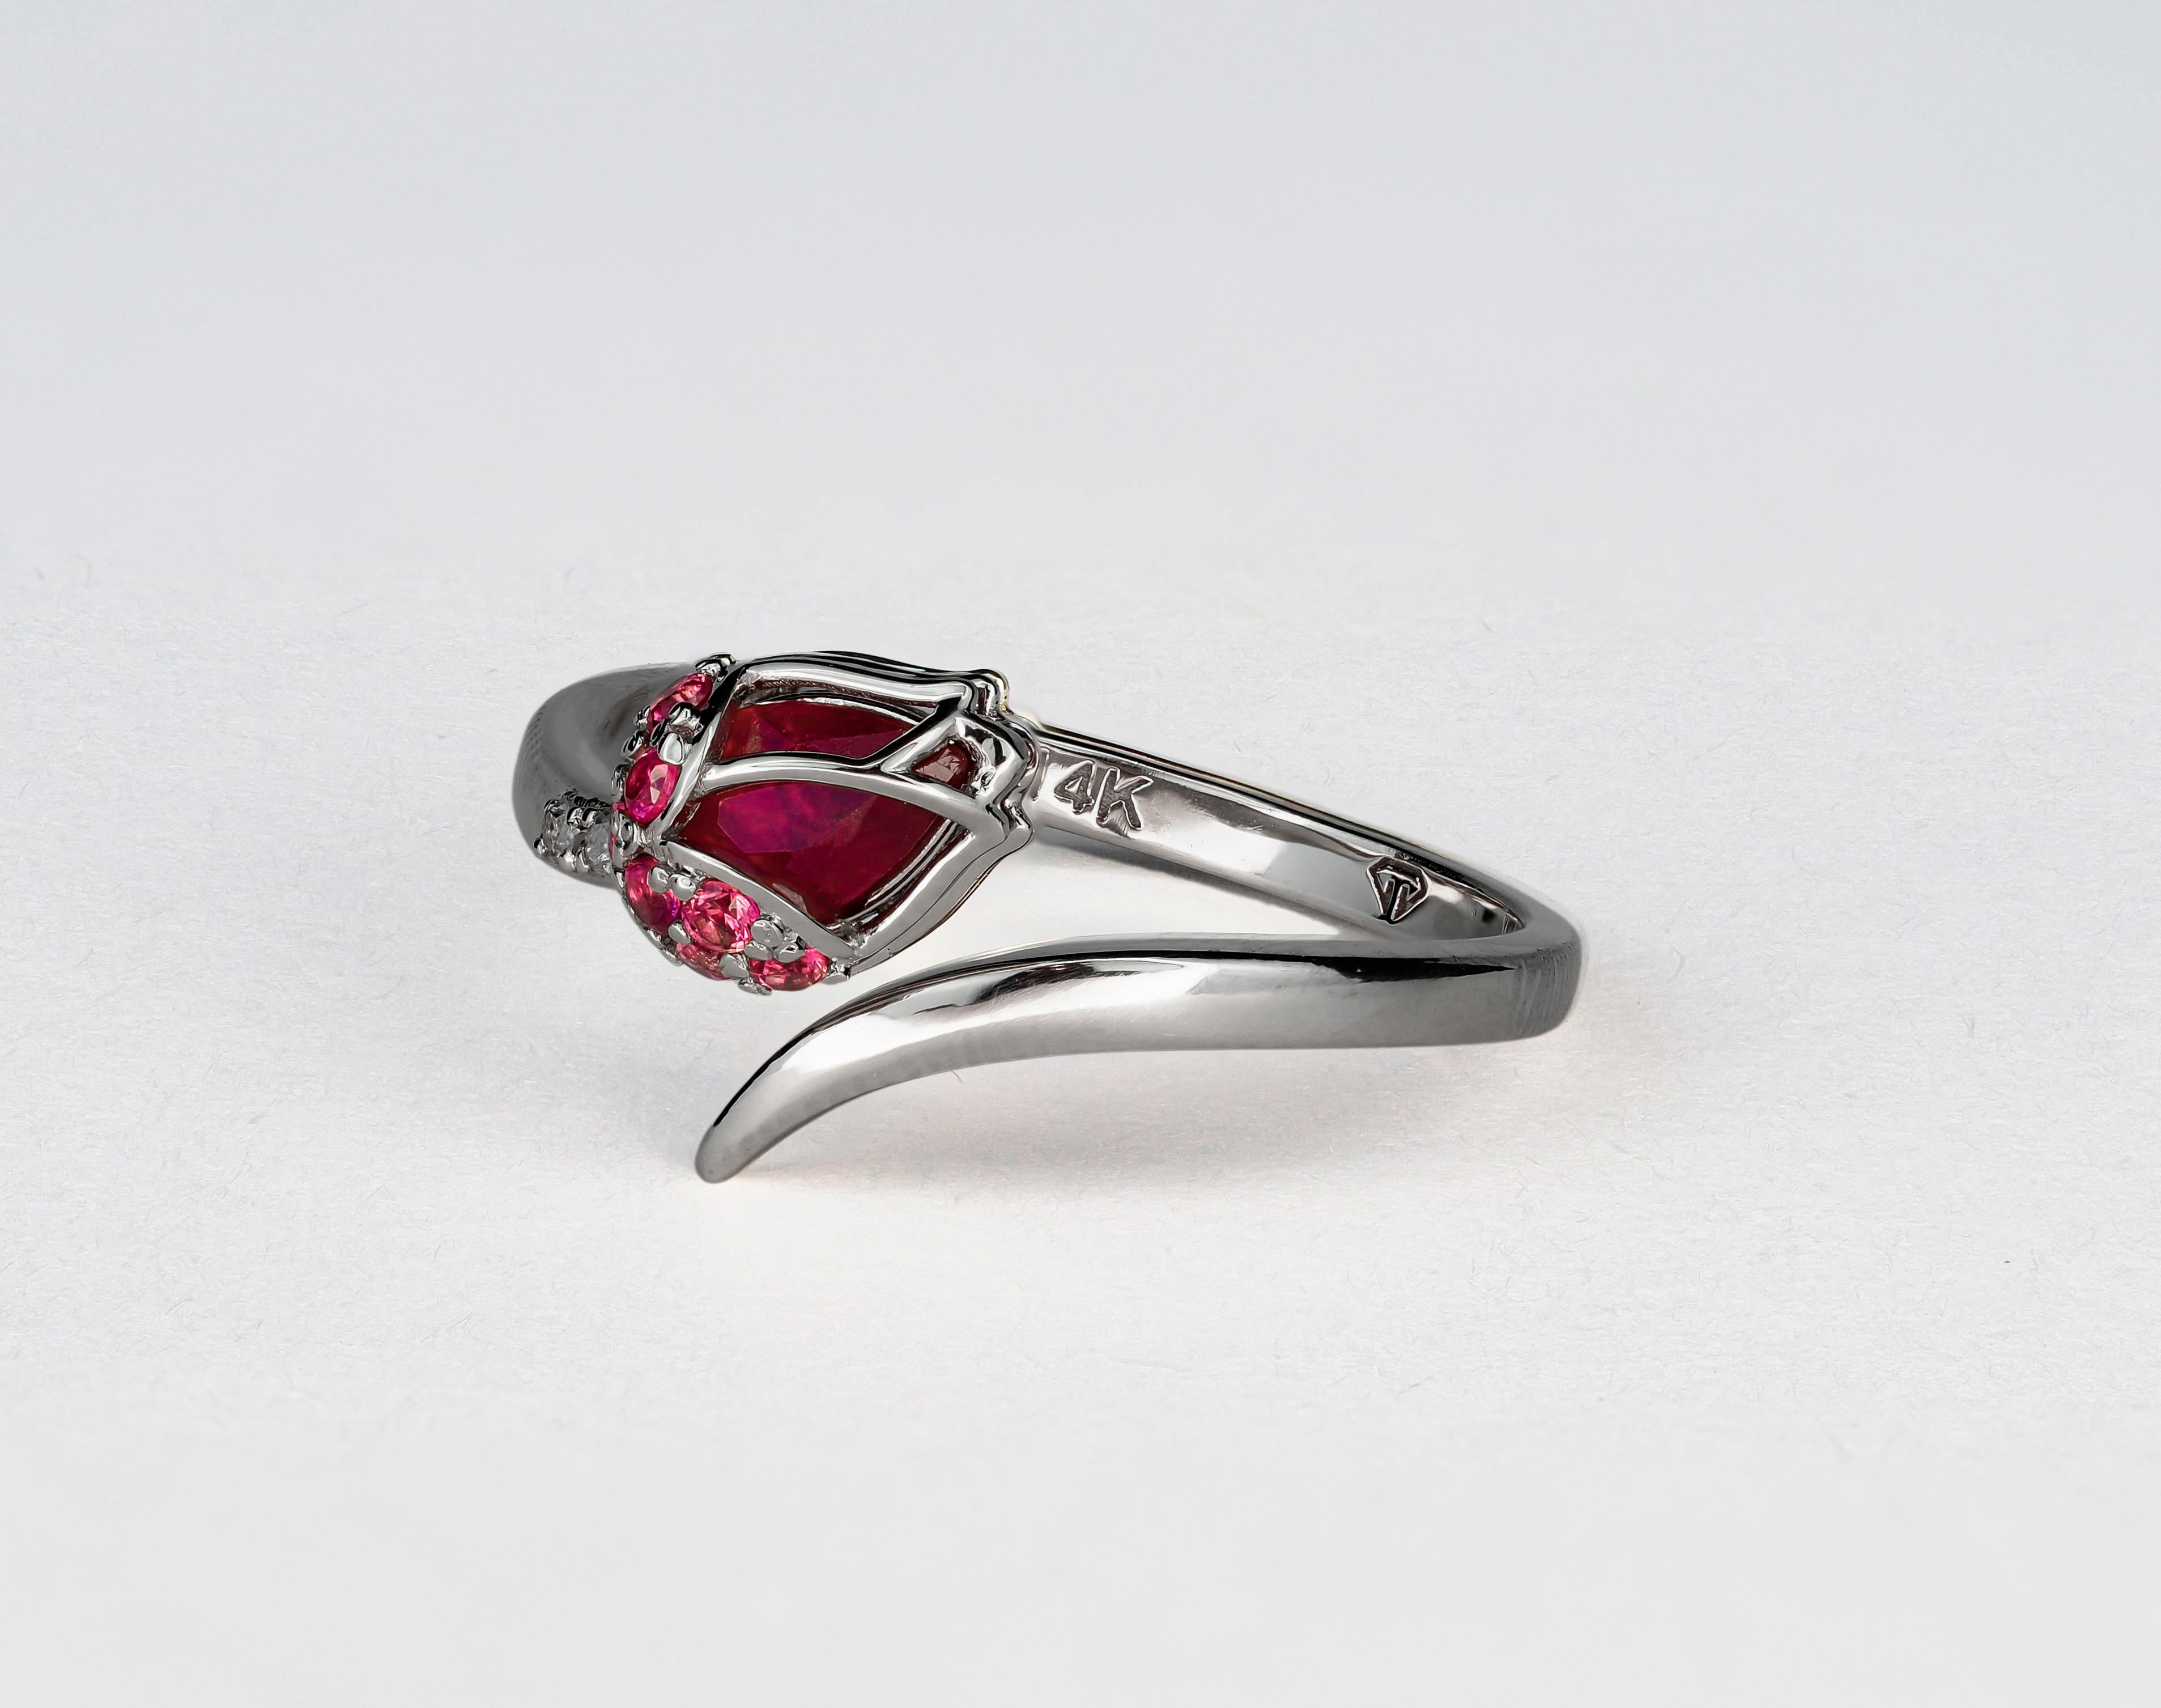 For Sale:  14 karat Gold Ring with Ruby. Gold tulip ring. July birthstone ruby ring 5